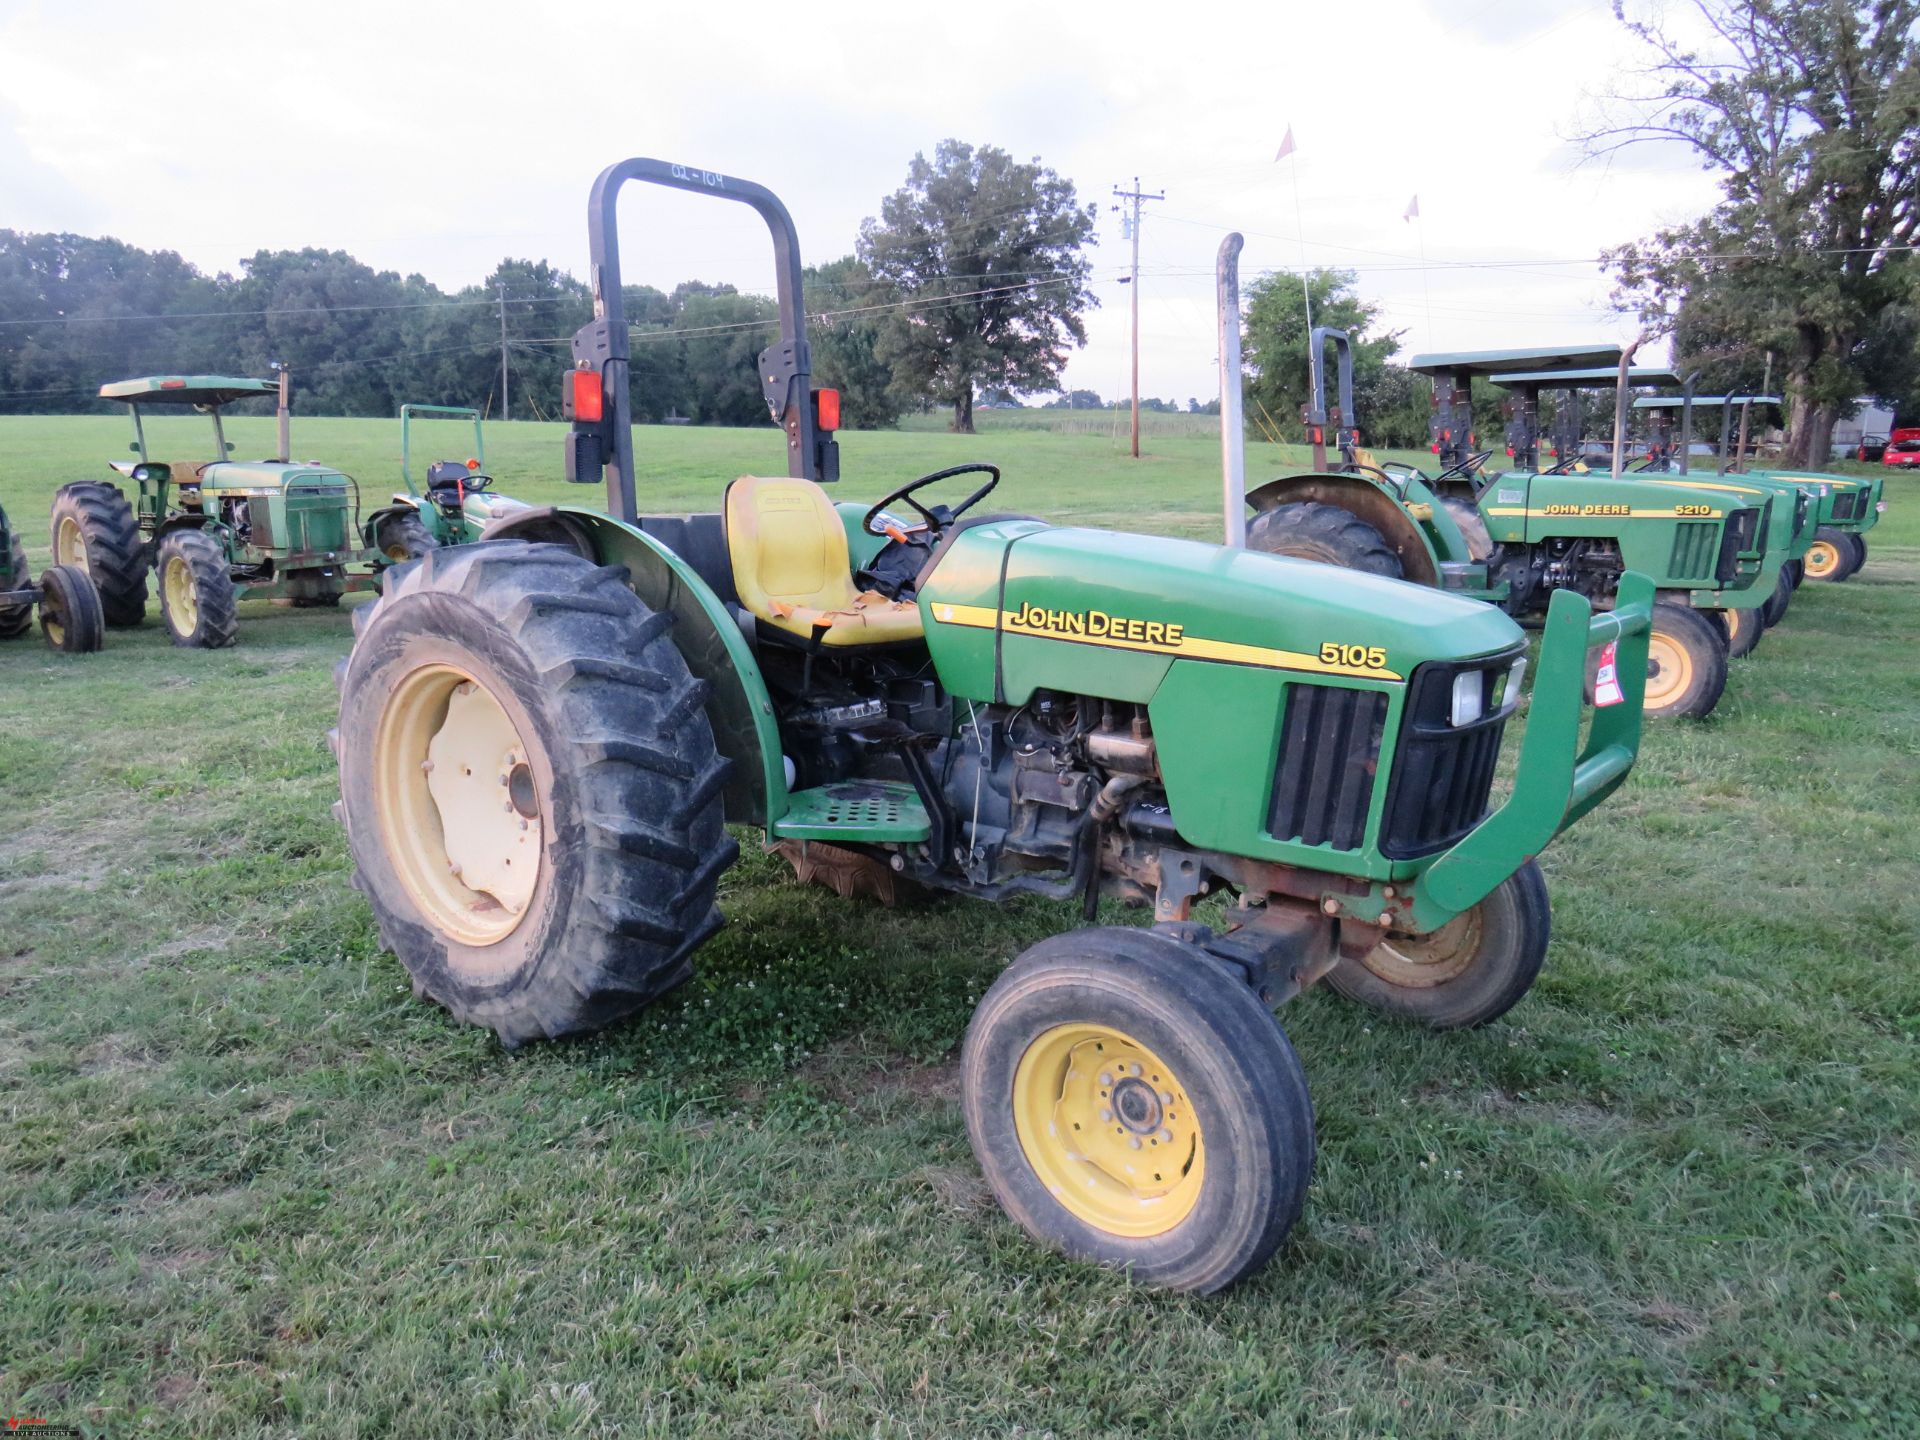 2004 JOHN DEERE 5105 TRACTOR, PTO, 16.9-28 REAR TIRES, 4178 HOURS SHOWING (HOURS SUBJECT TO CHANGE), - Image 2 of 7